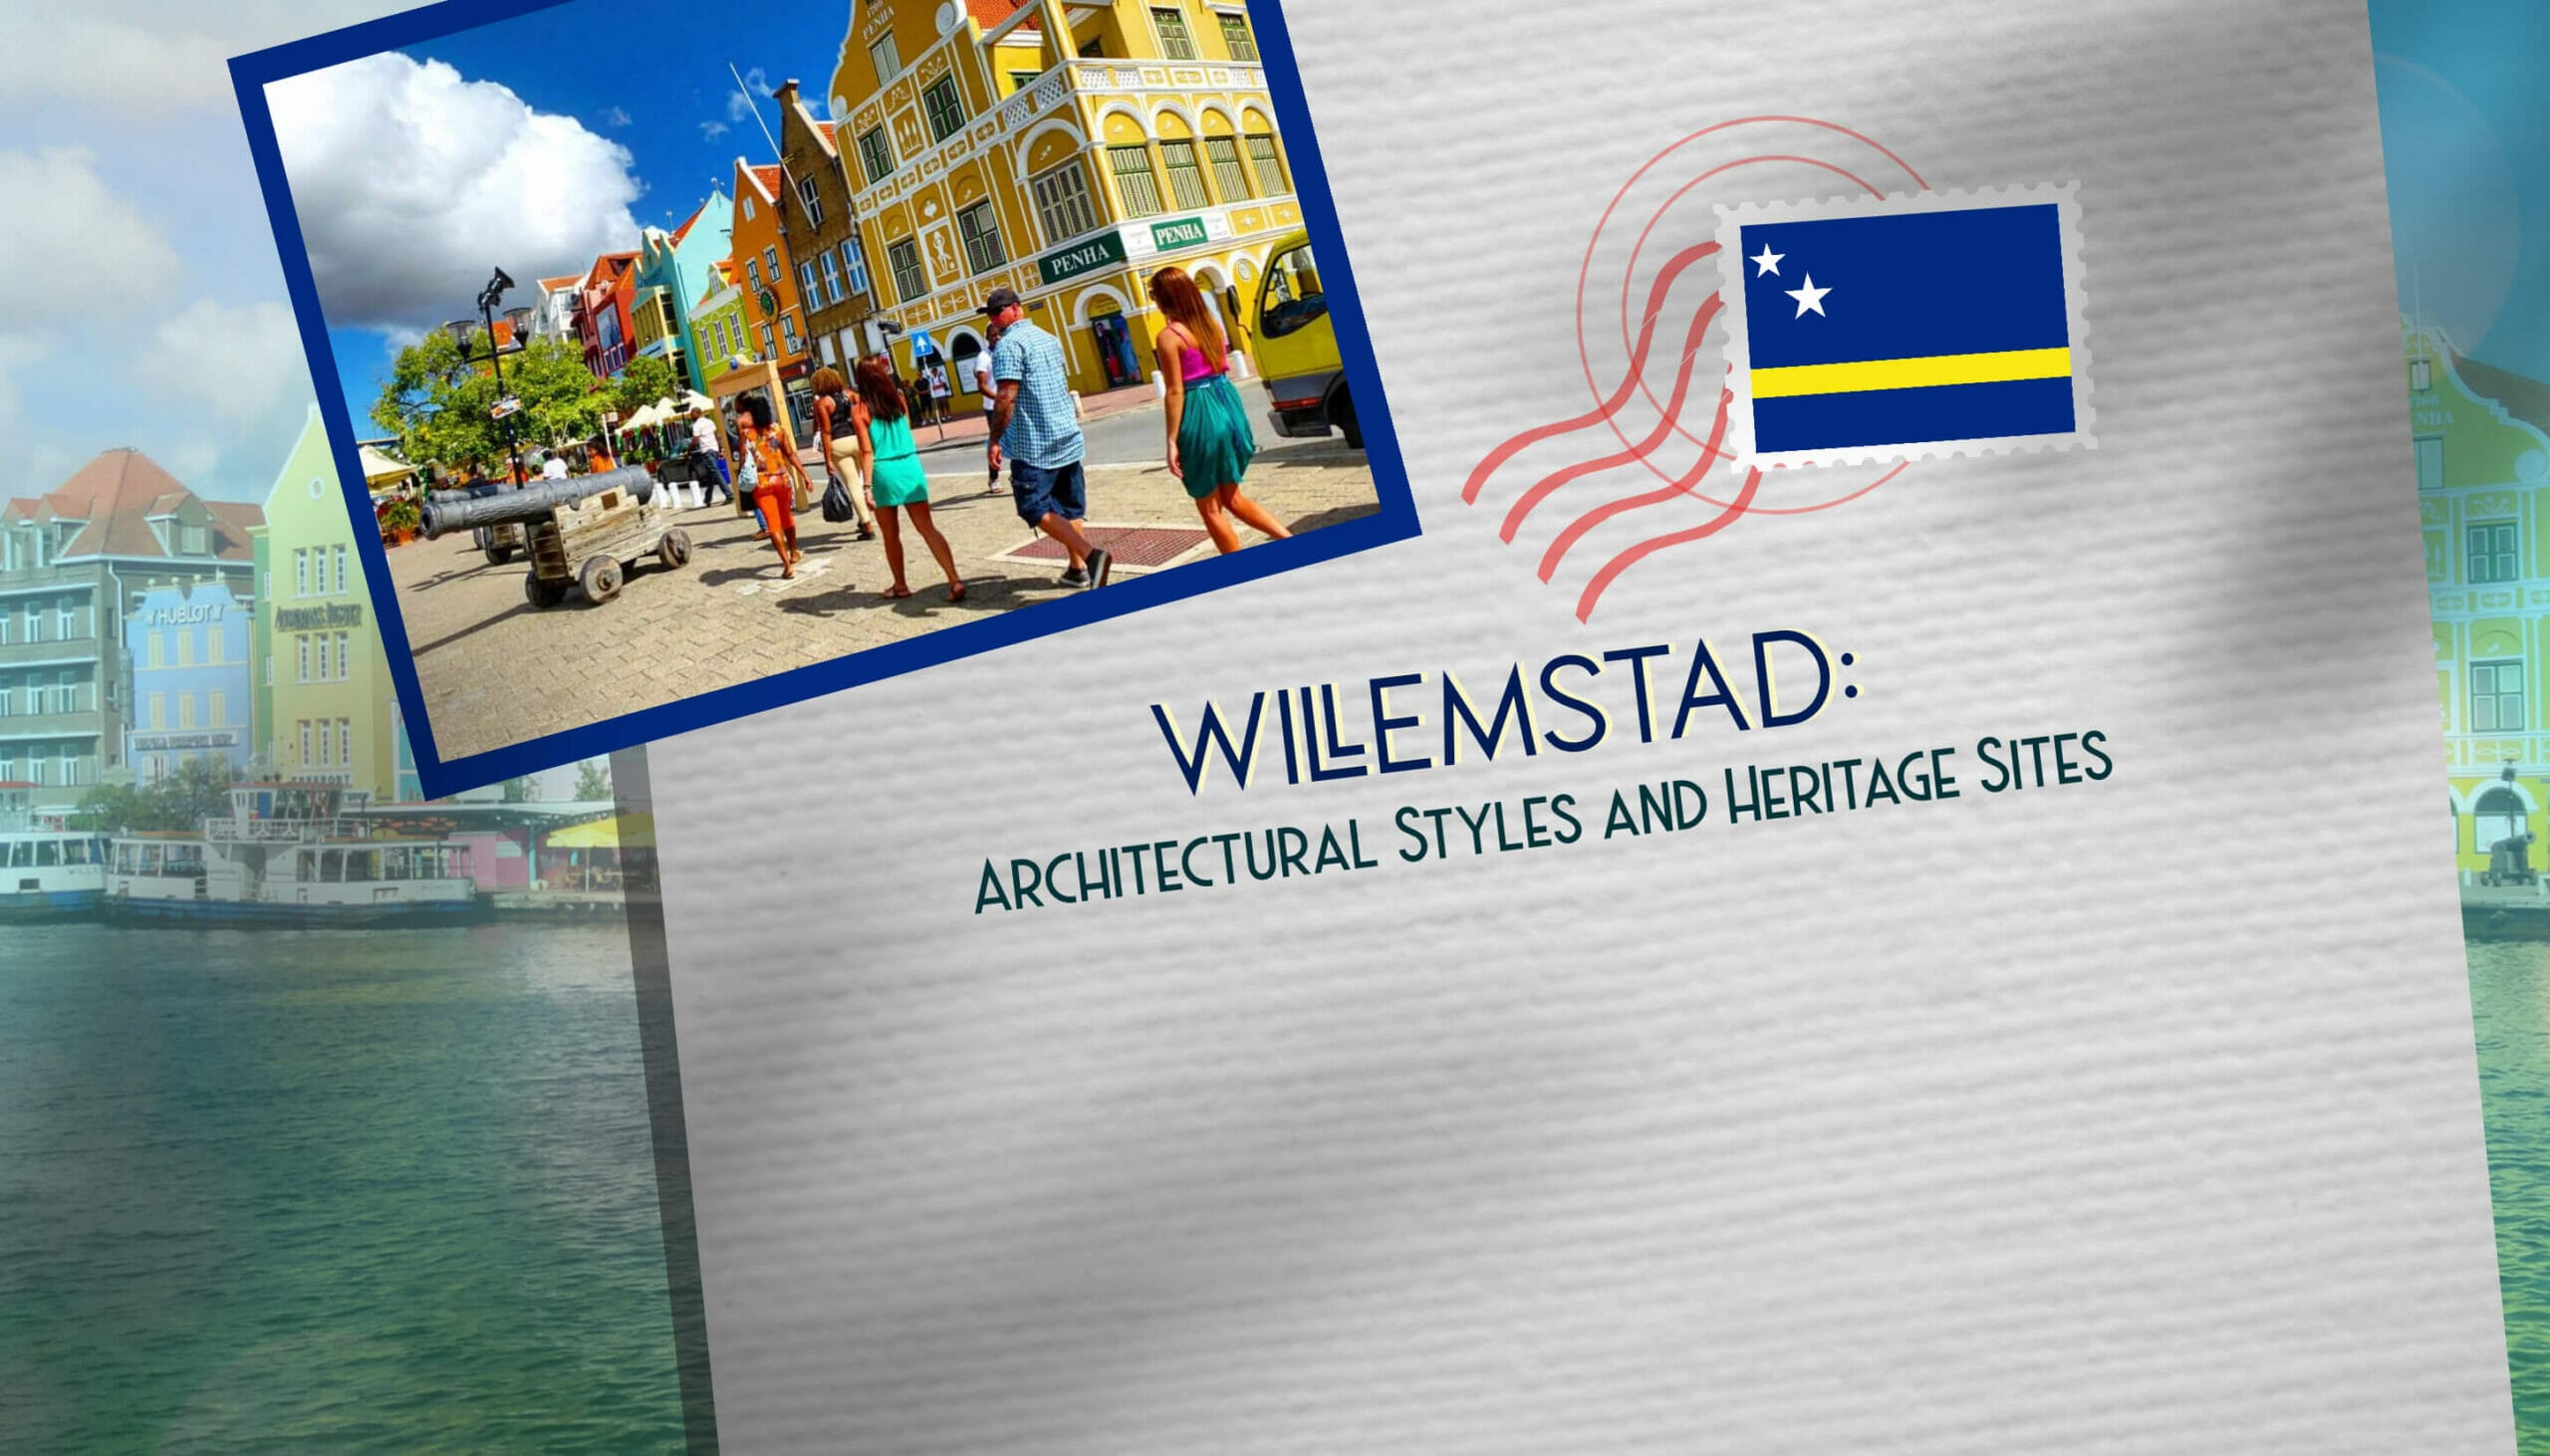 Willemstad Architectural Styles and Heritage Sites